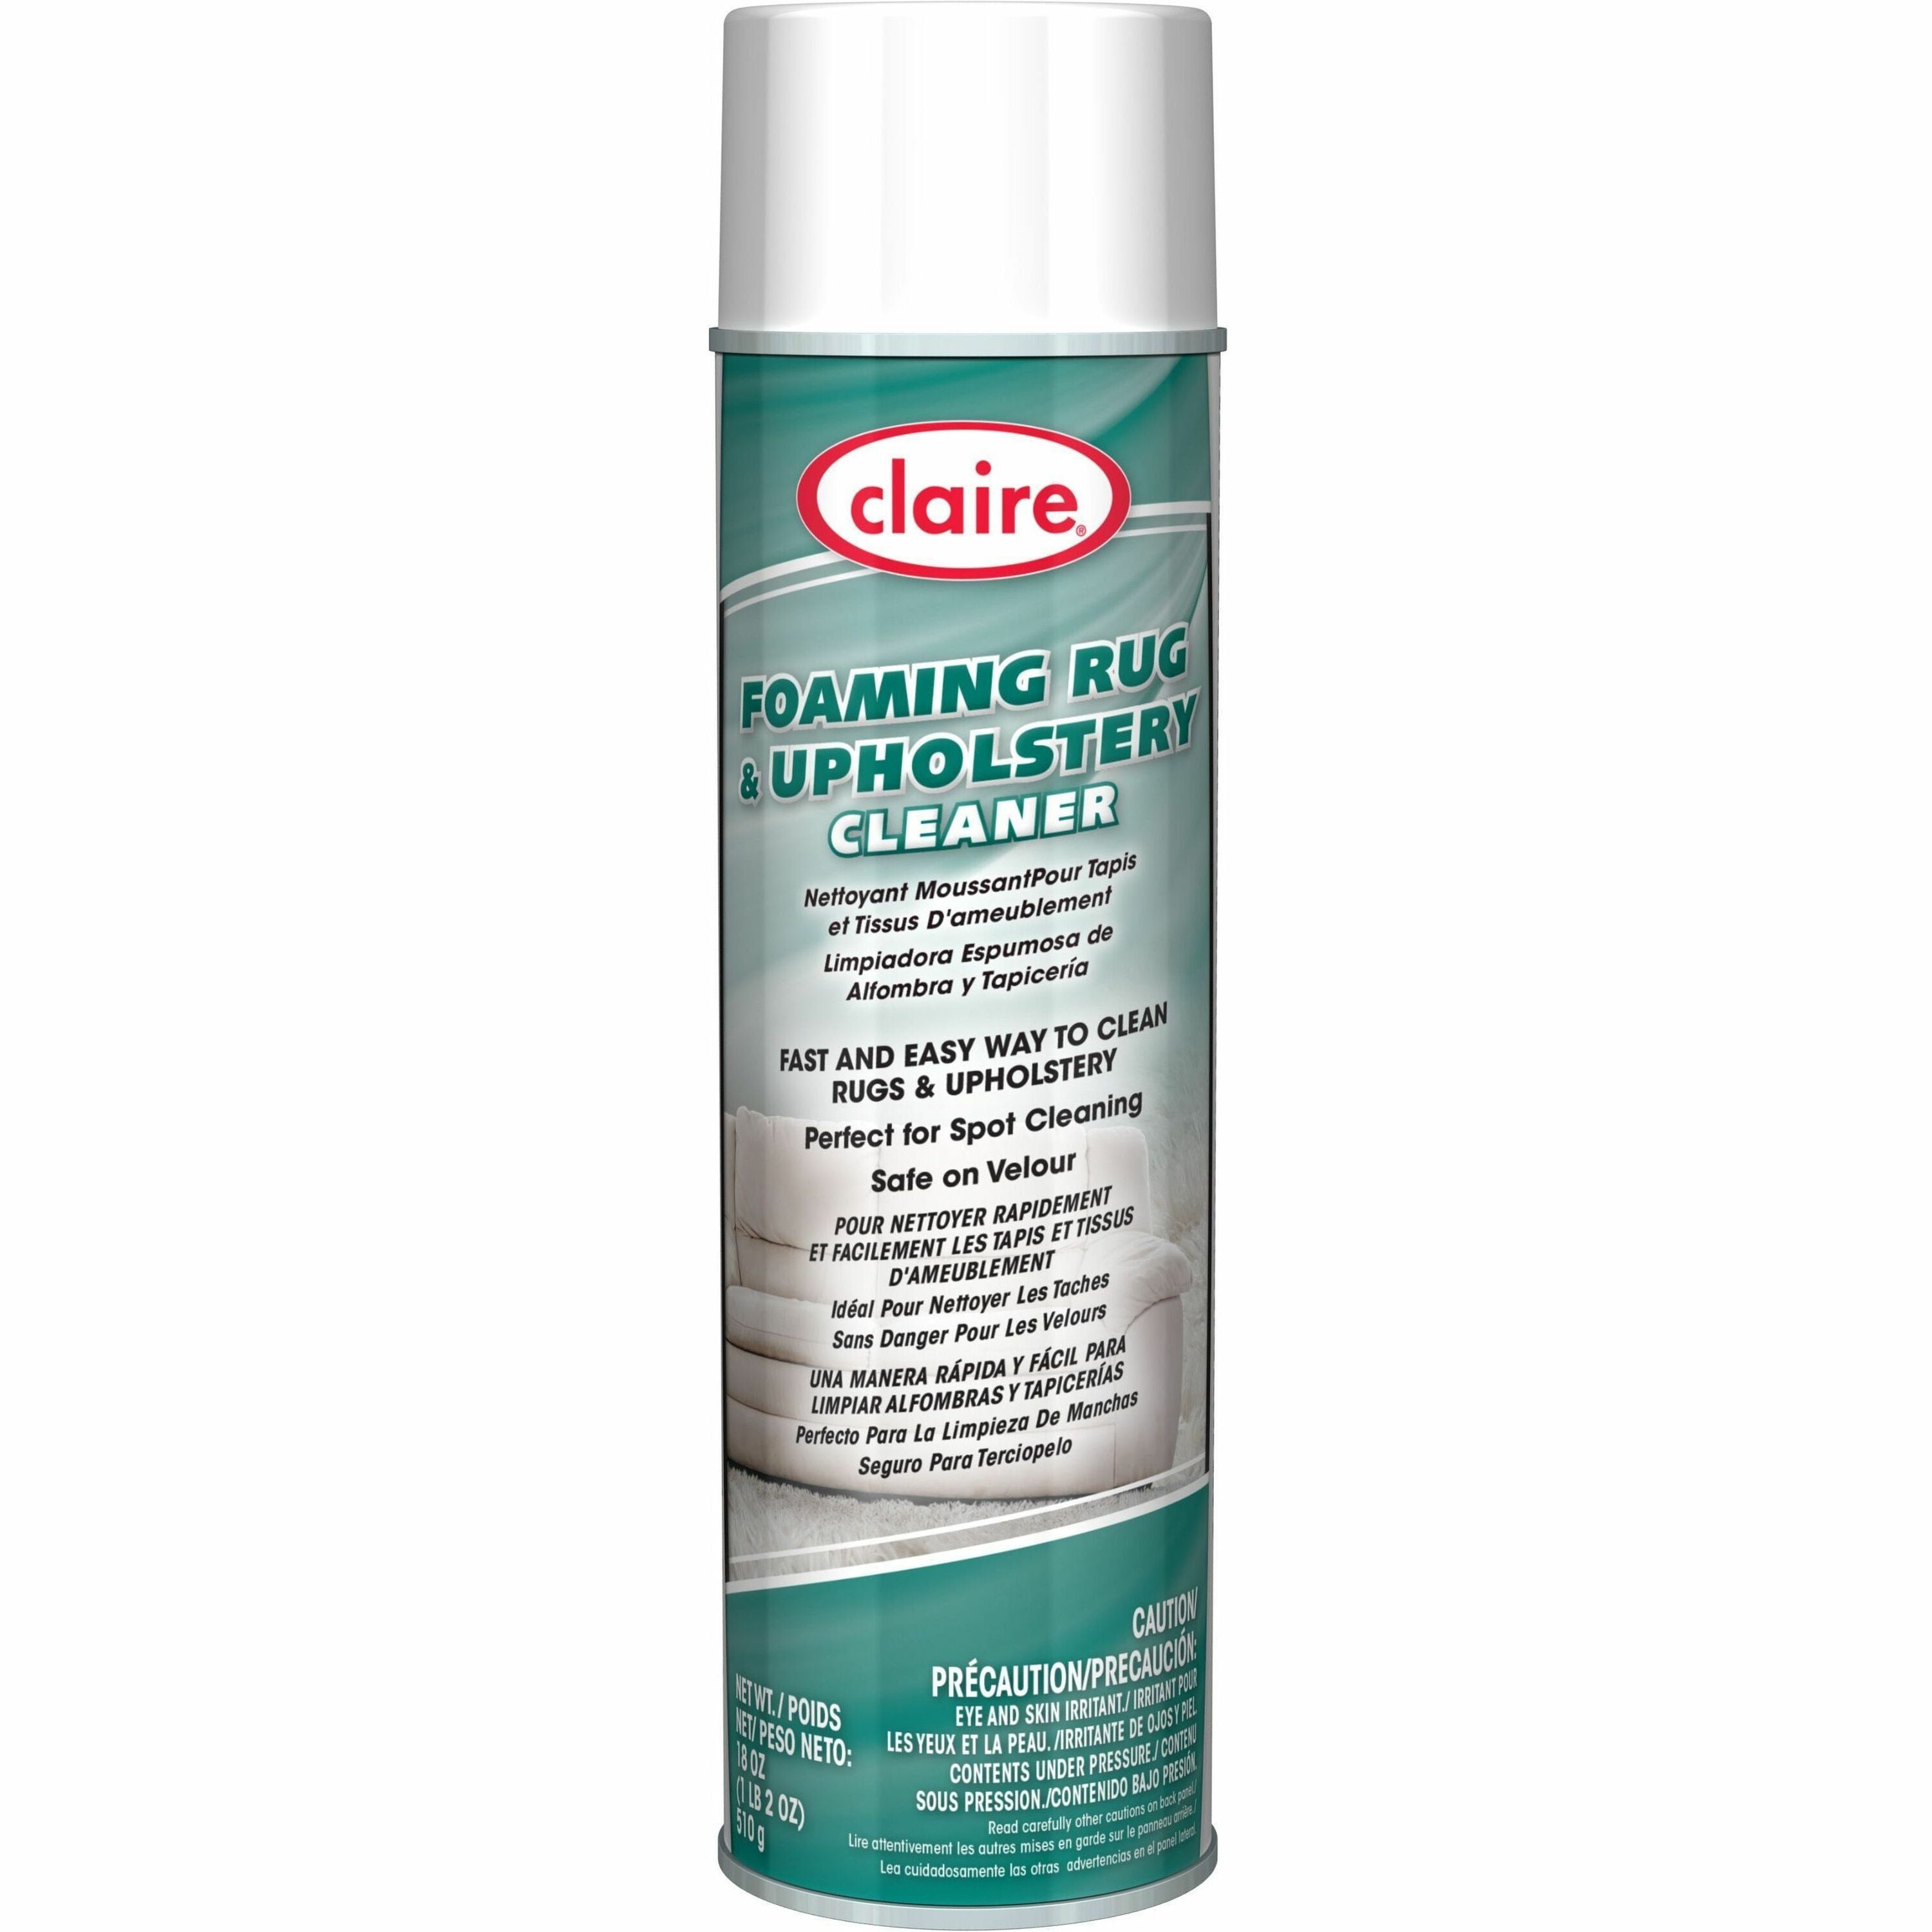 Claire Foaming Rug/Upholstery Cleaner - 18 fl oz (0.6 quart) - Ammonia Scent - 1 Each - Colorless - 1